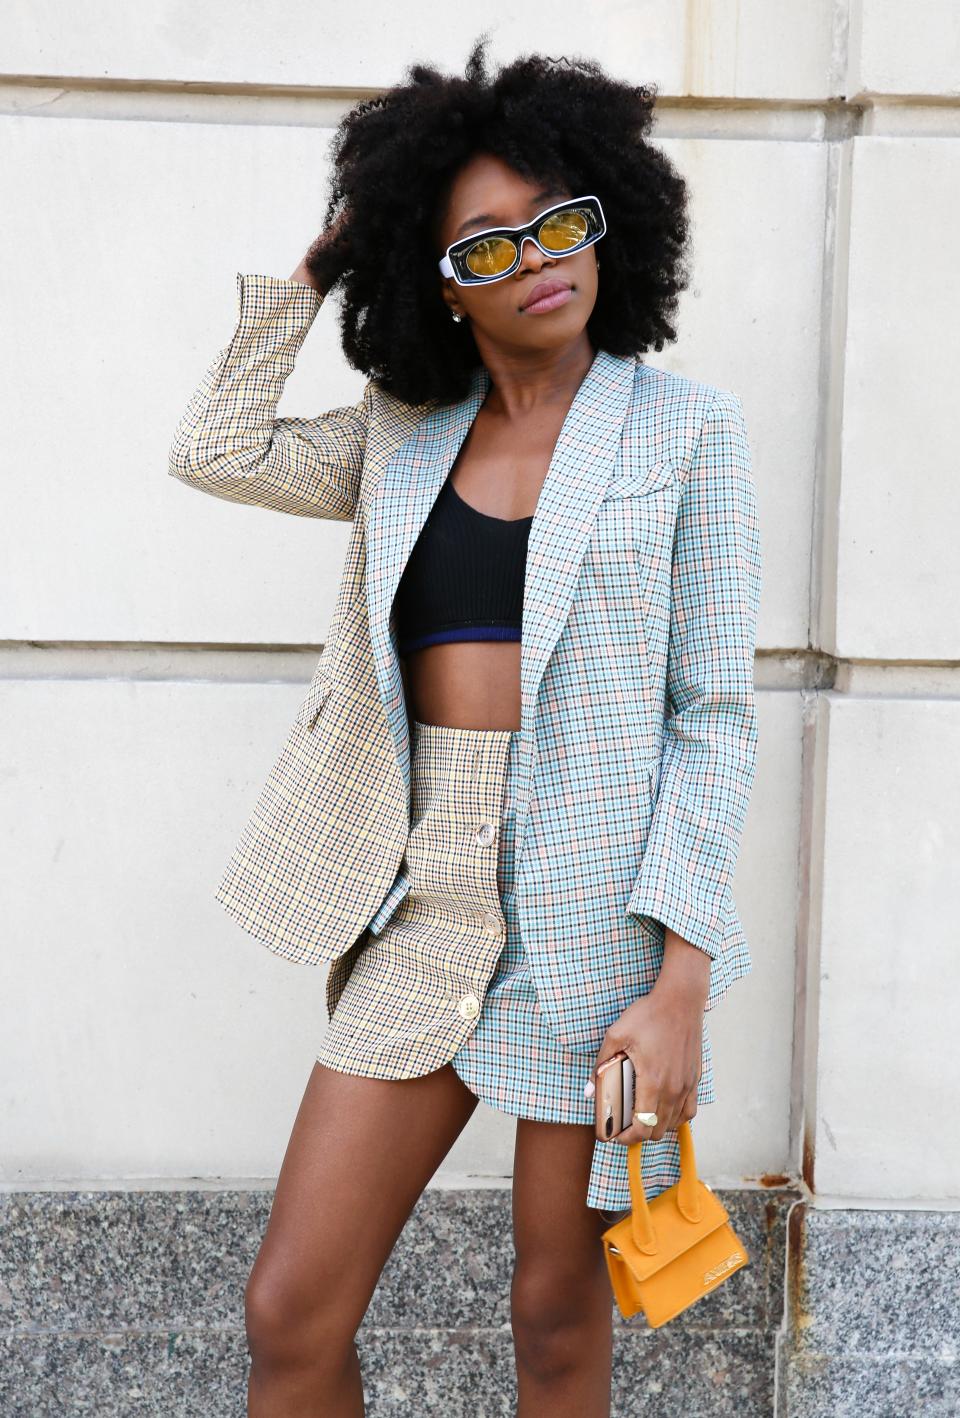 For a daring option, skip the shirts and style a plaid suit with a sports bra.